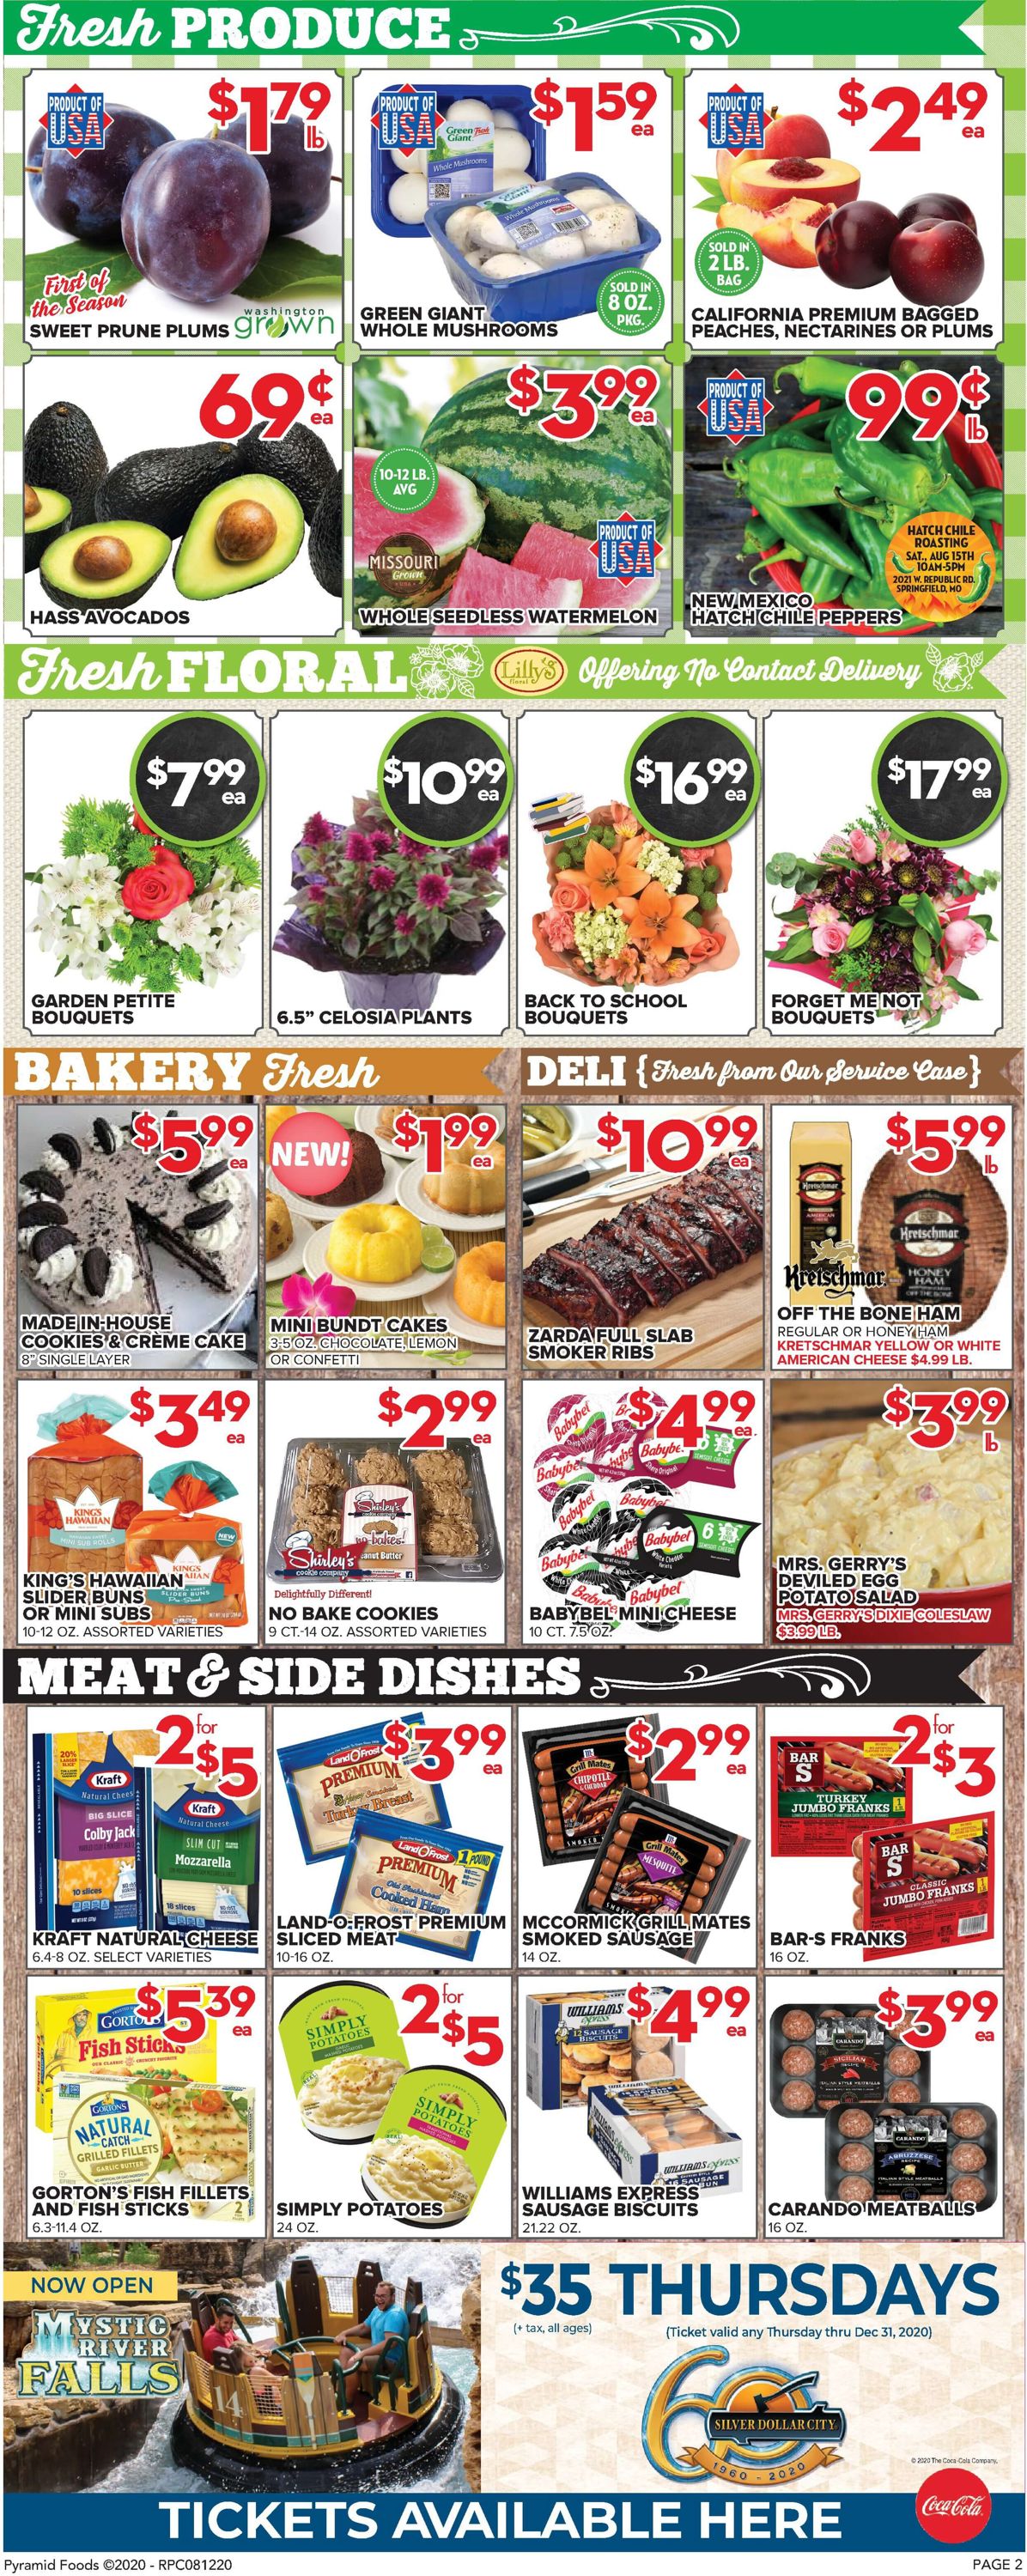 Price Cutter Weekly Ad Circular - valid 08/12-08/18/2020 (Page 2)